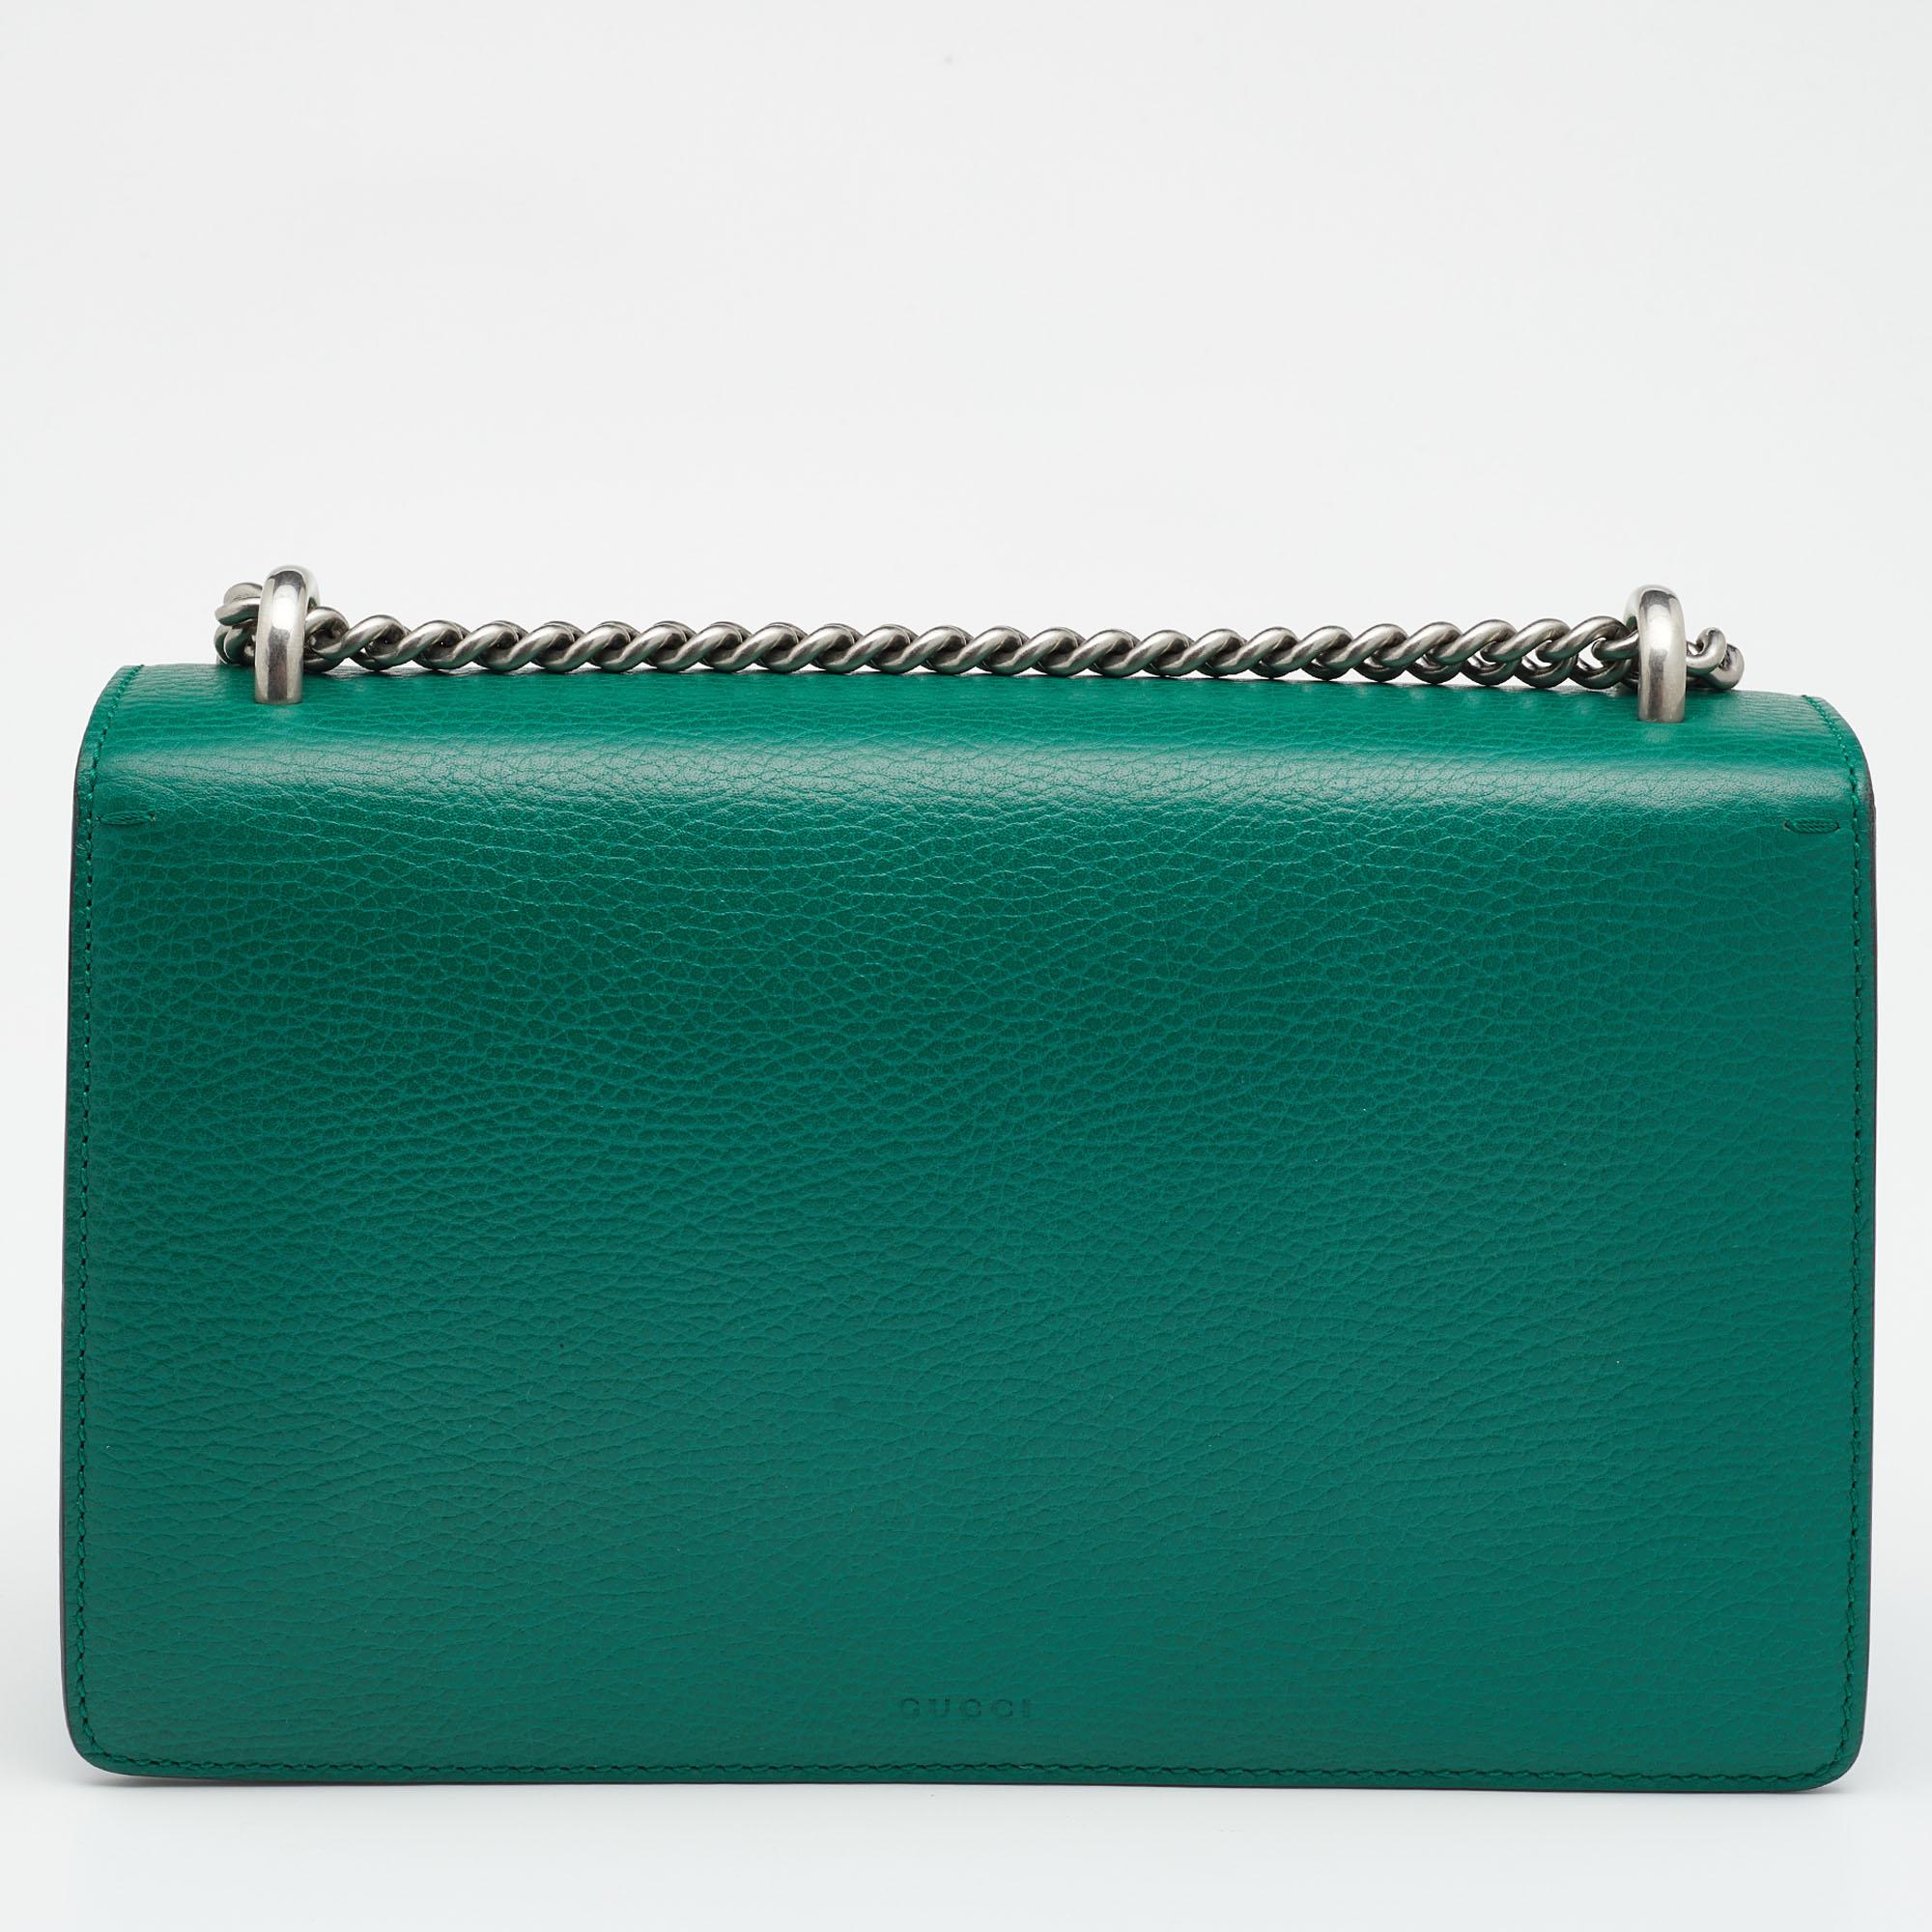 Gucci's Dionysus collection is inspired by the Greek God who is believed to have crossed the Tigris river on a tiger given to him by his father, Zeus. This creation has been beautifully made from leather in a green hue. The flap secures the interior